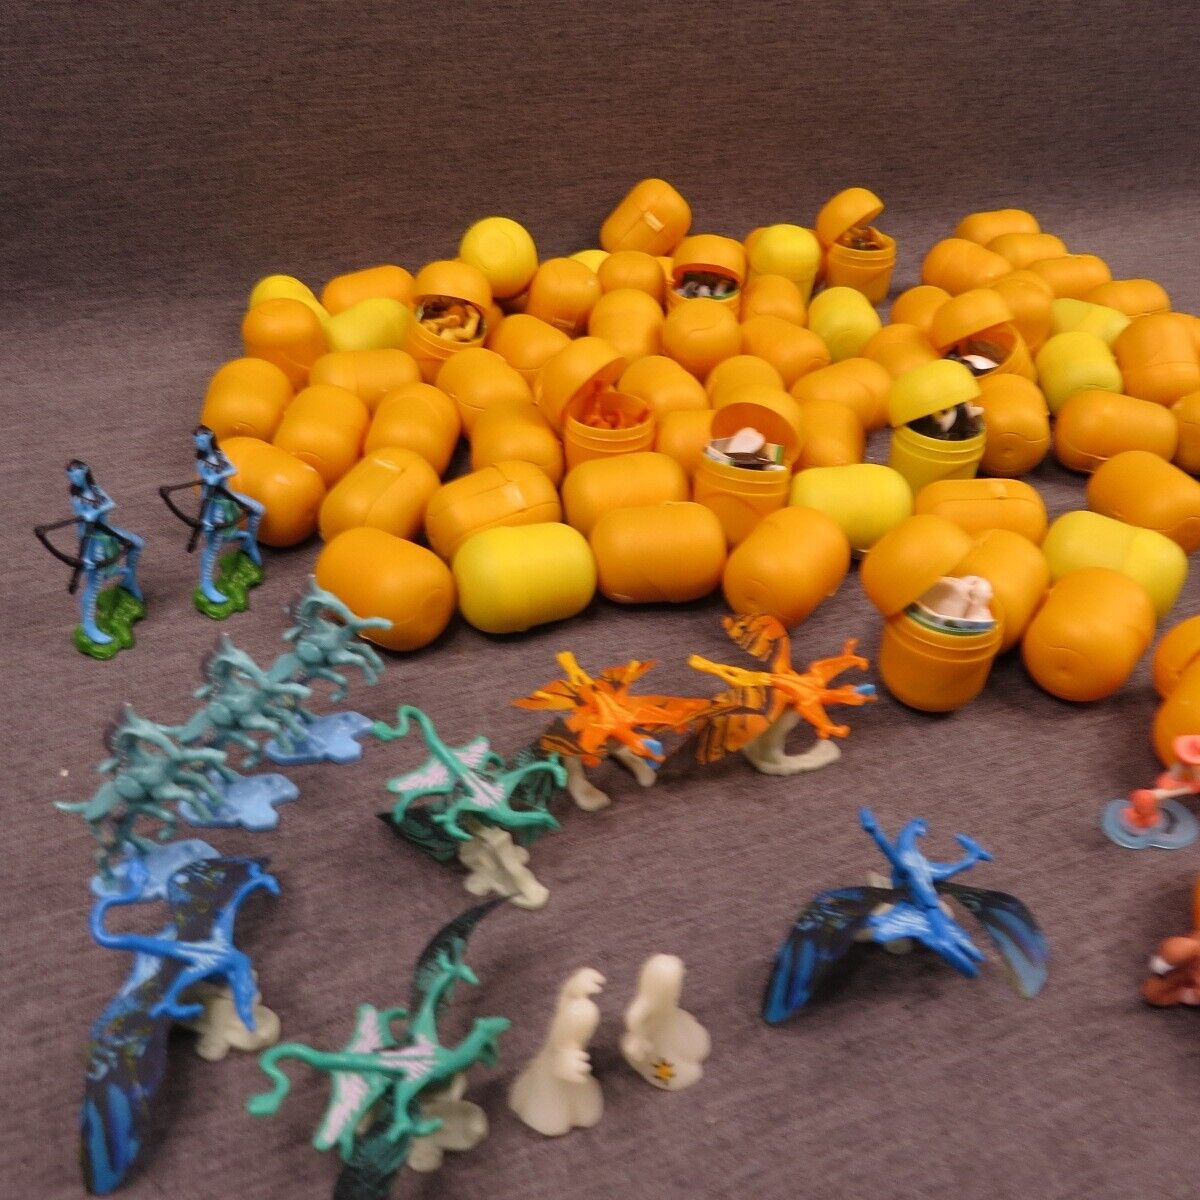 Kinder Surprise Toys And Unopened Surprises